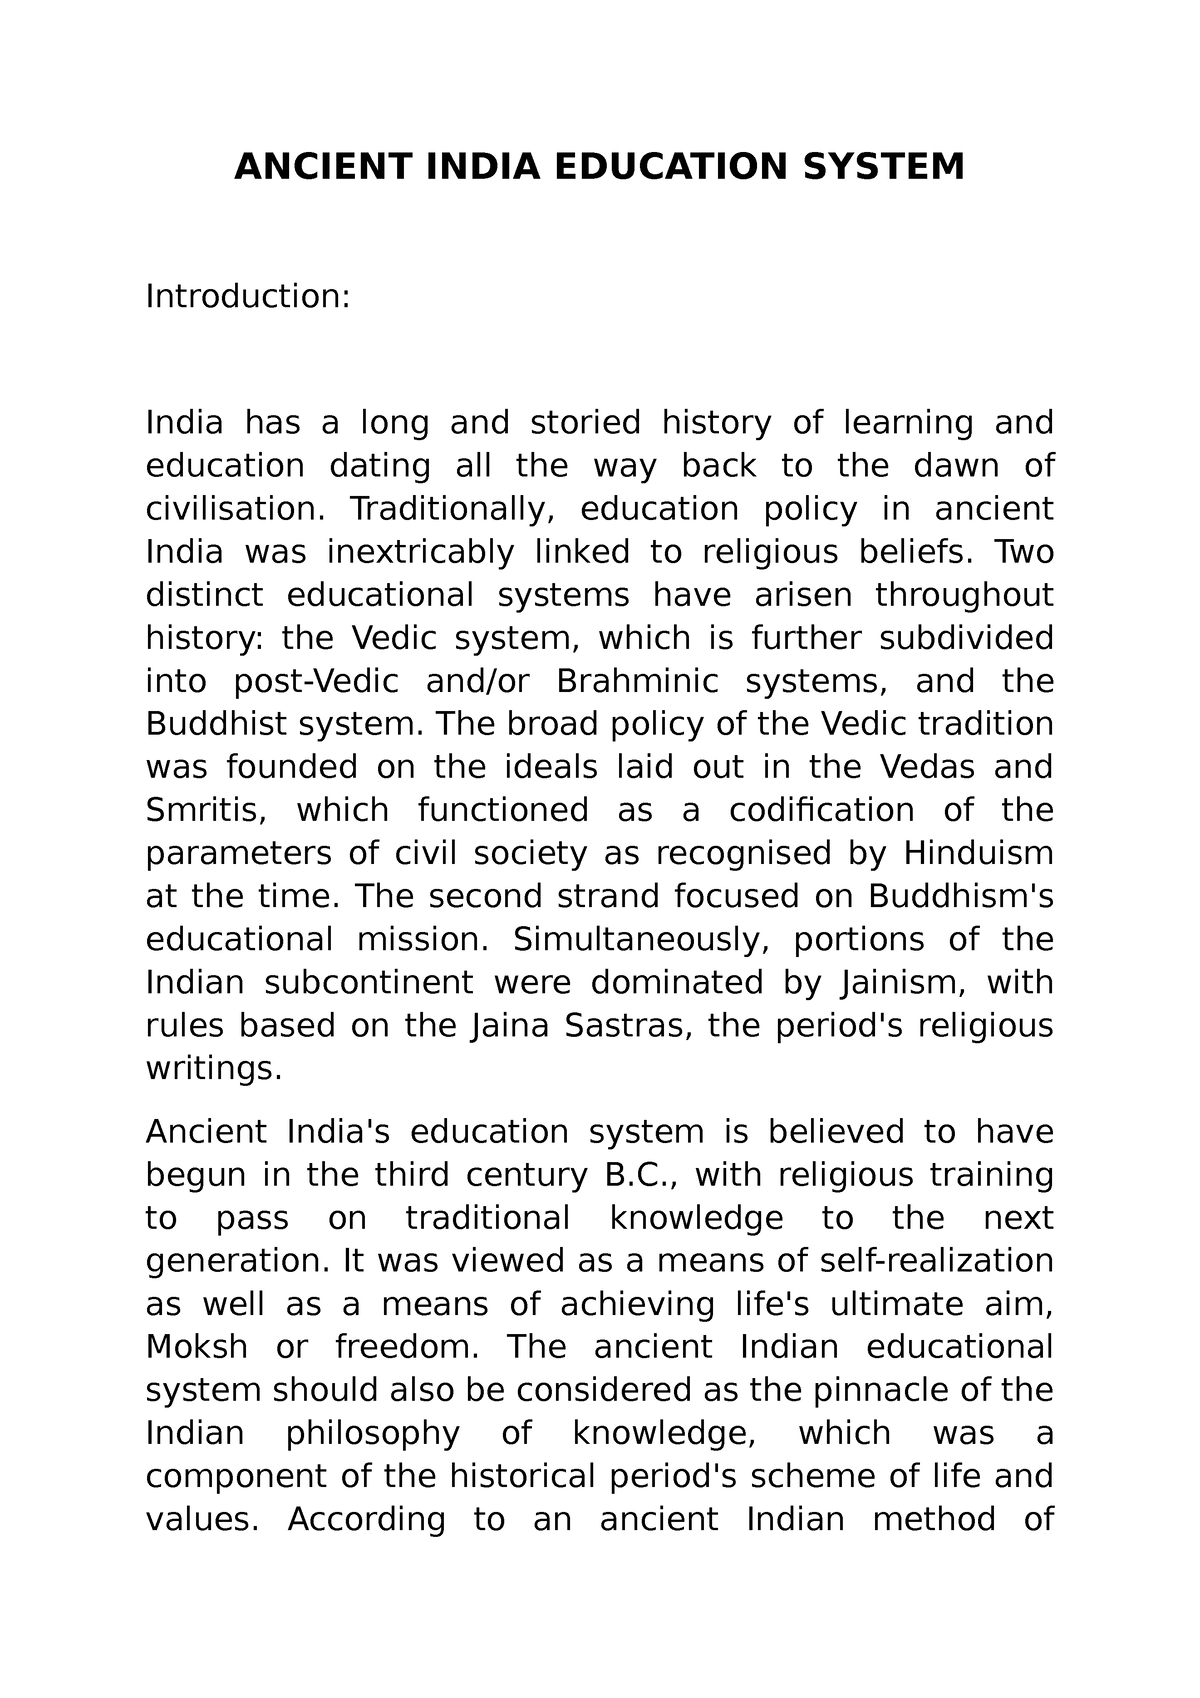 essay about ancient education system